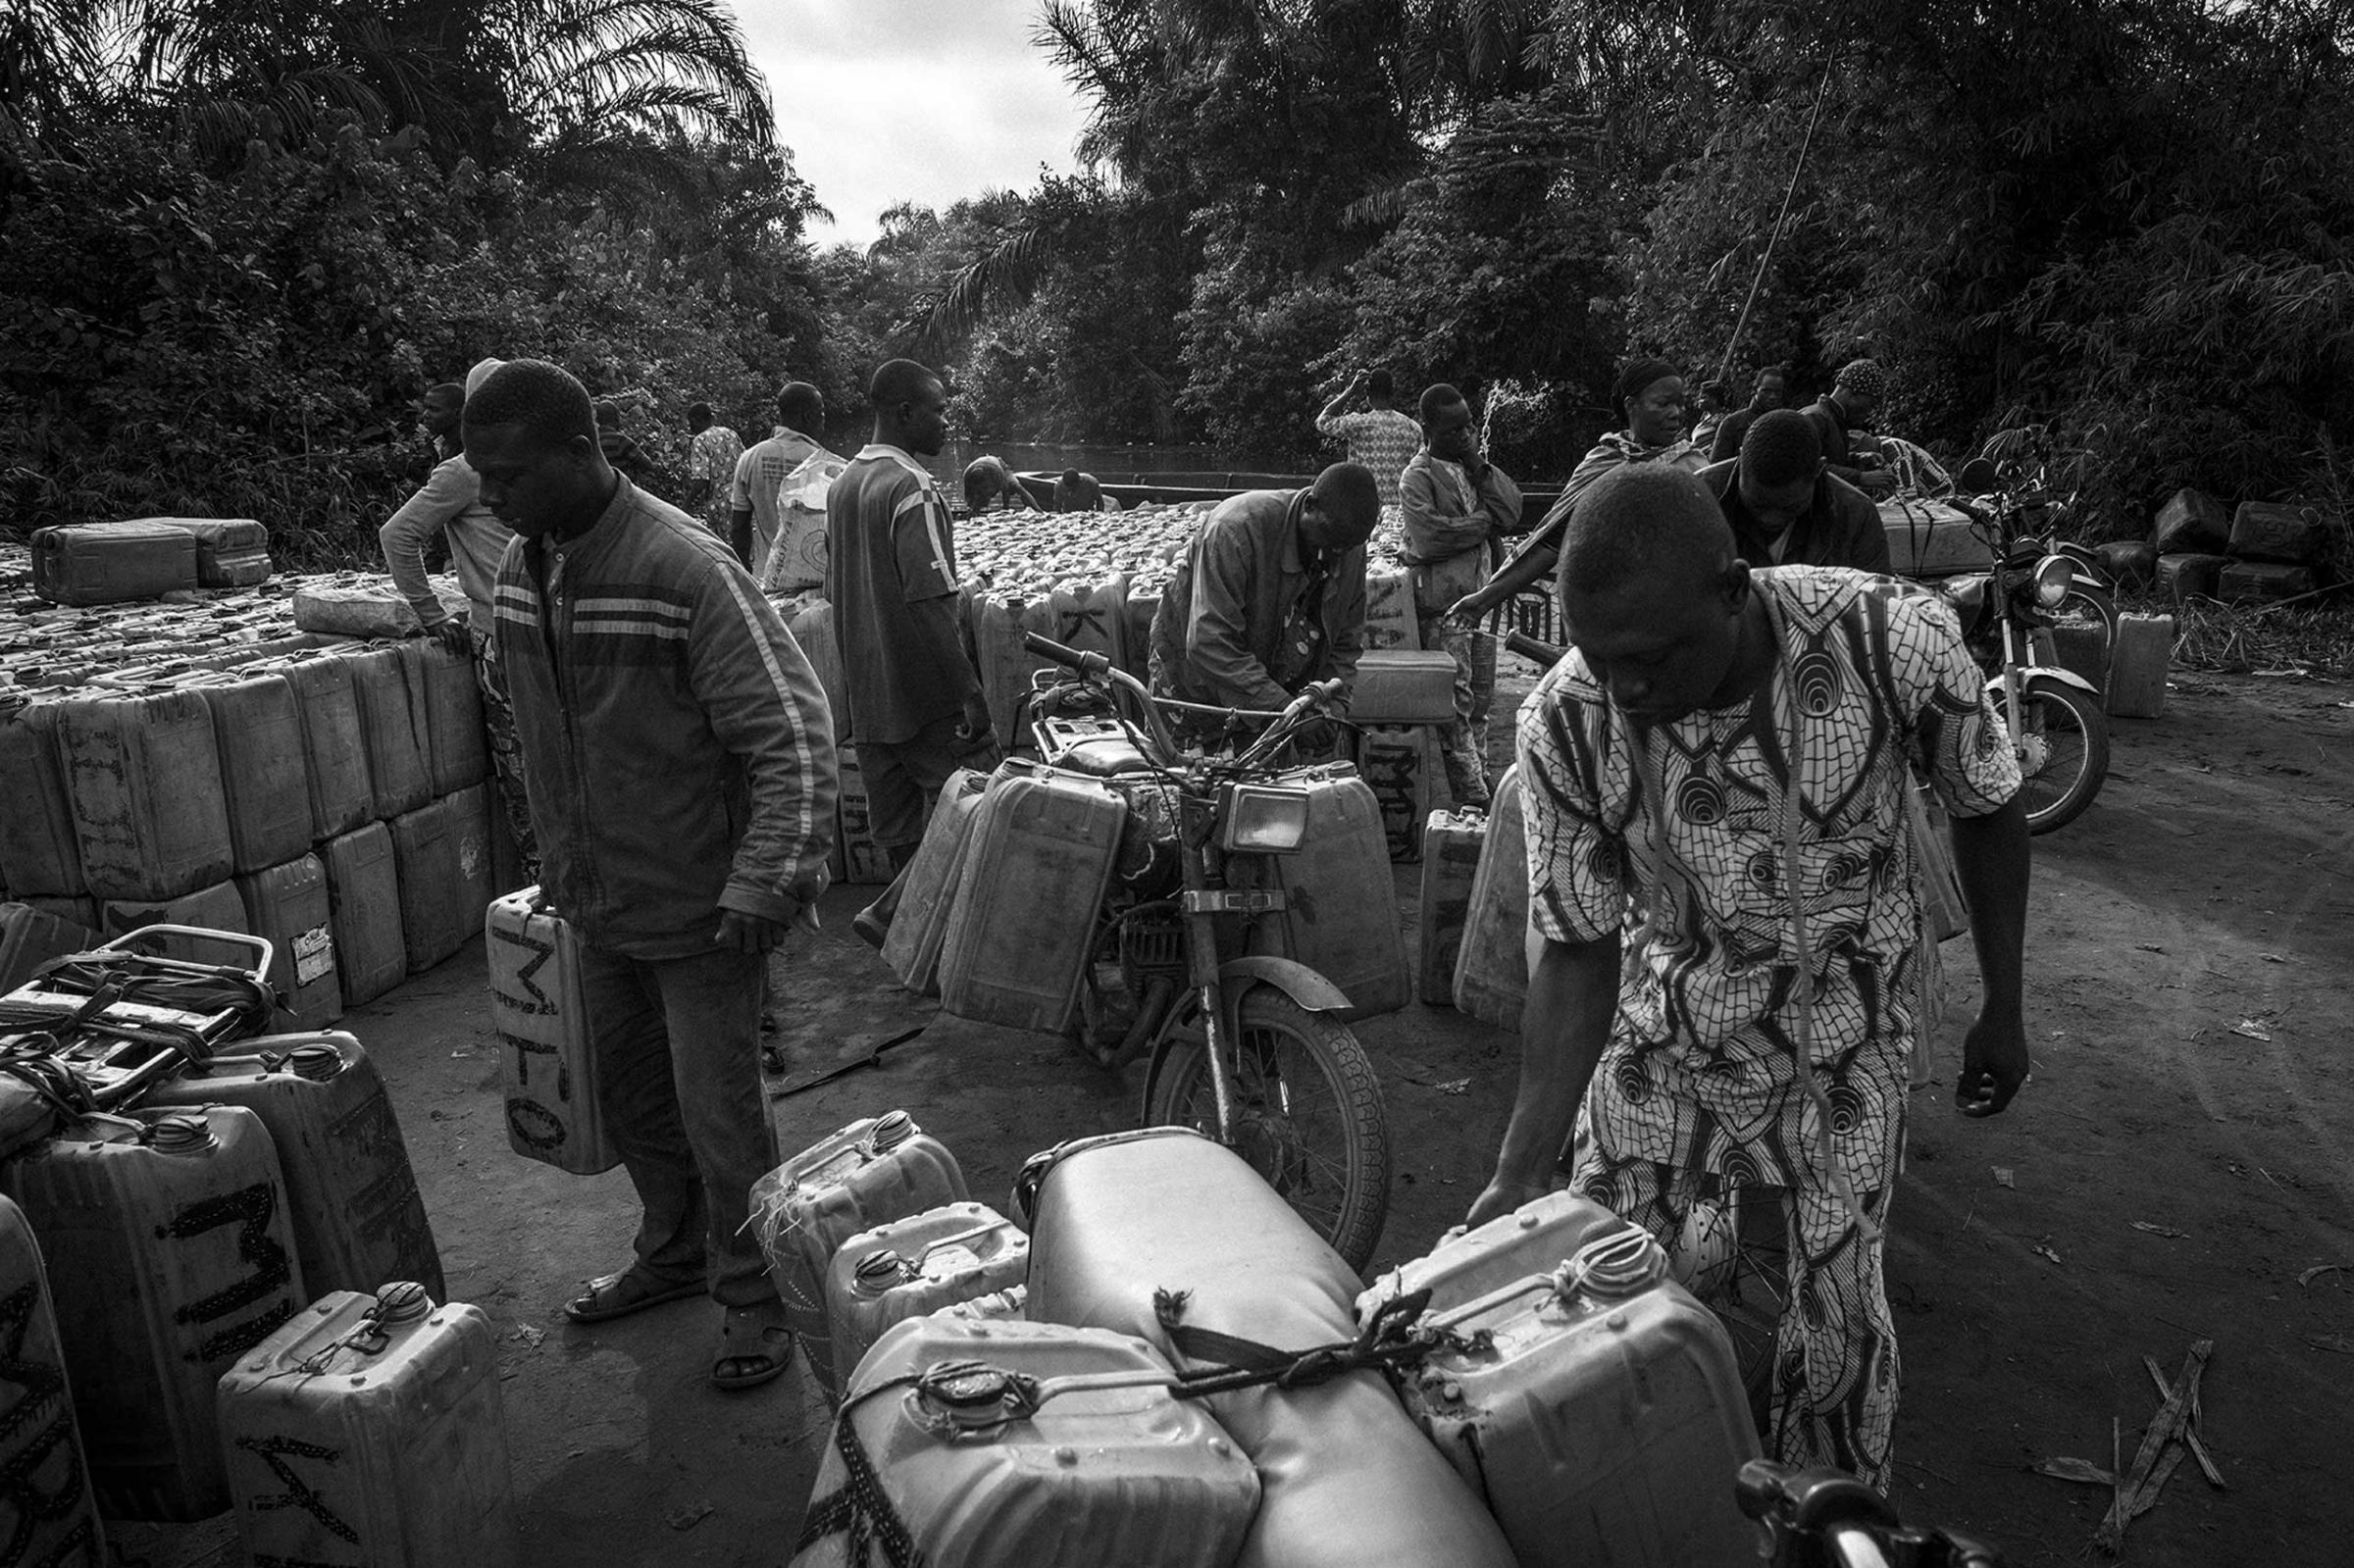 When the goods arrive on Beninese soil, hundreds of drivers wait on the seashore with their motorbikes for the arrival of the drums marked with the initials of their leaders. The first task of the motorcyclists is to identify the drums to load them up and assure properly on their motorbikes.